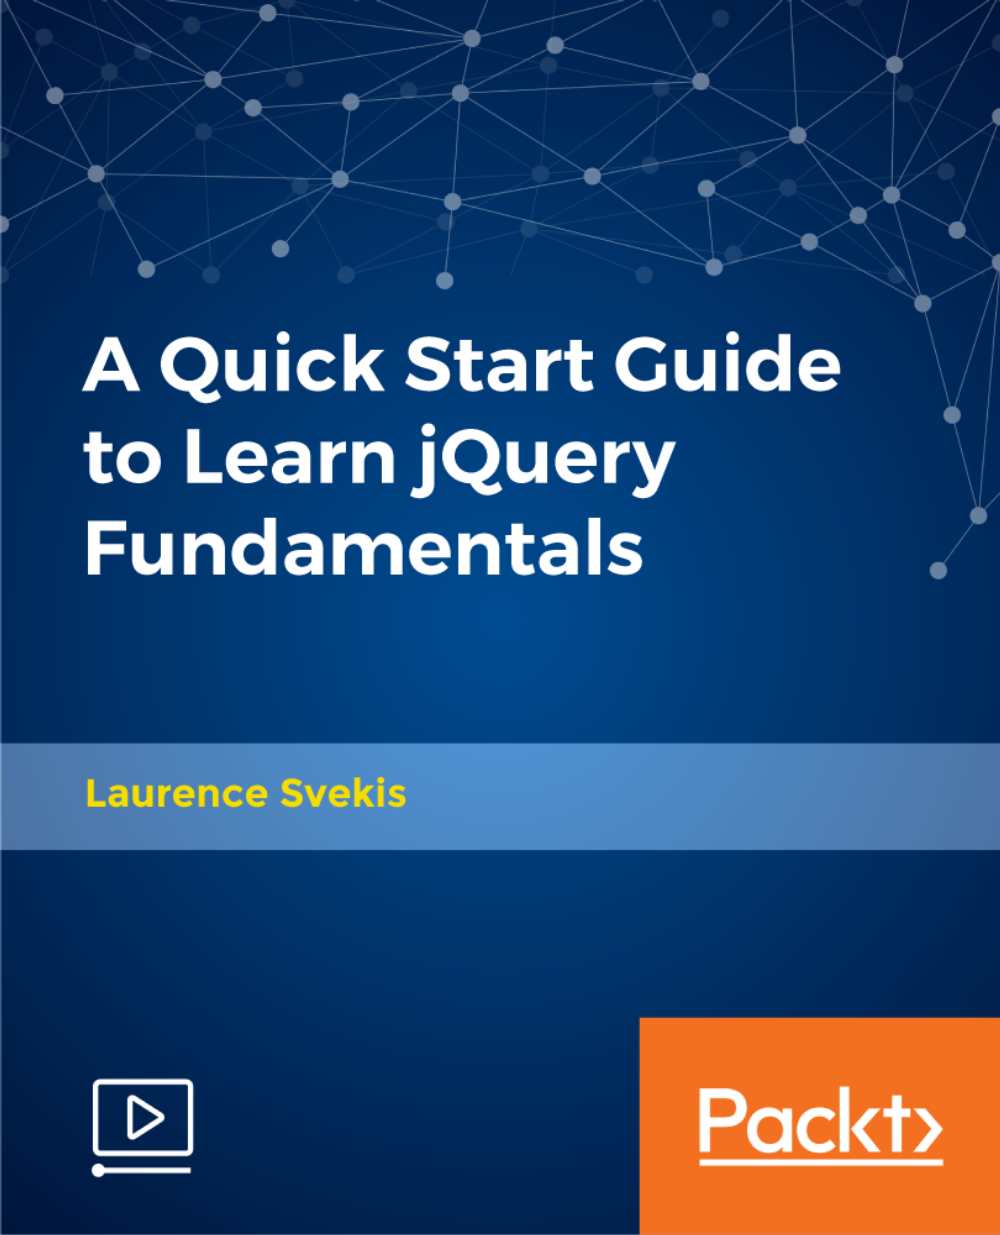 A Complete jQuery Course from Beginners to Advanced